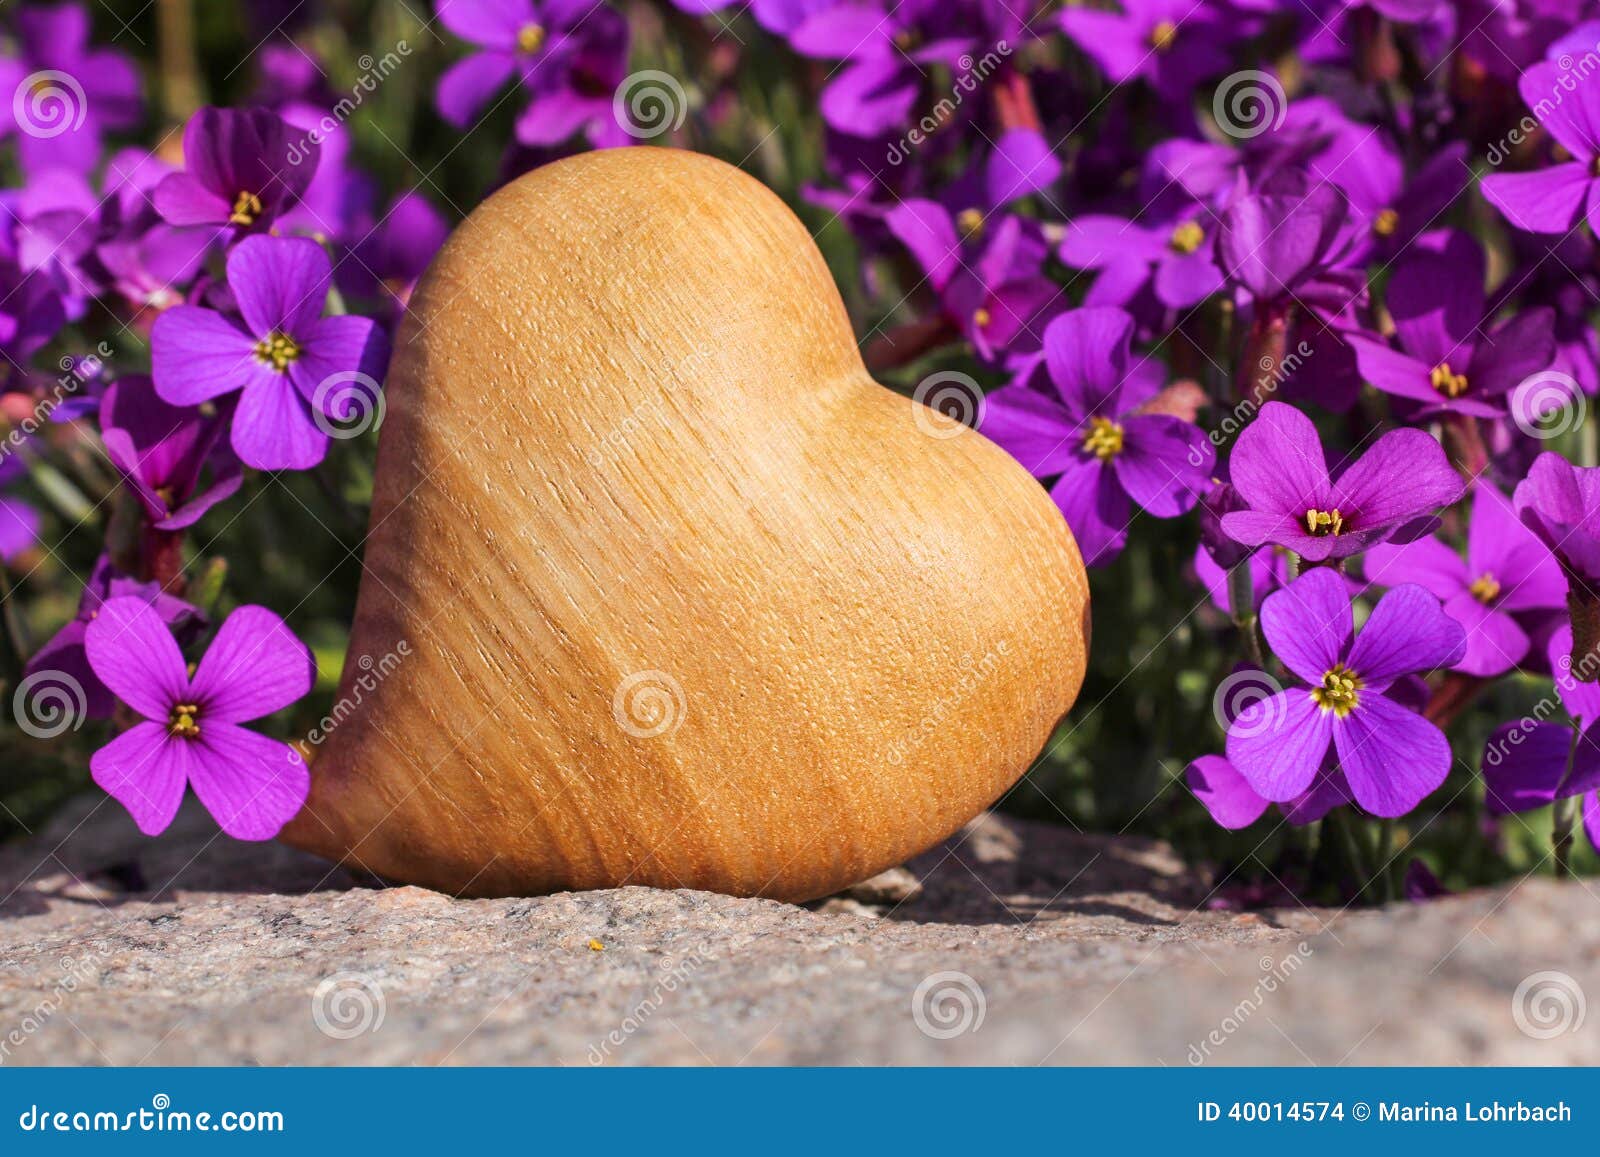 Wooden heart with flowers